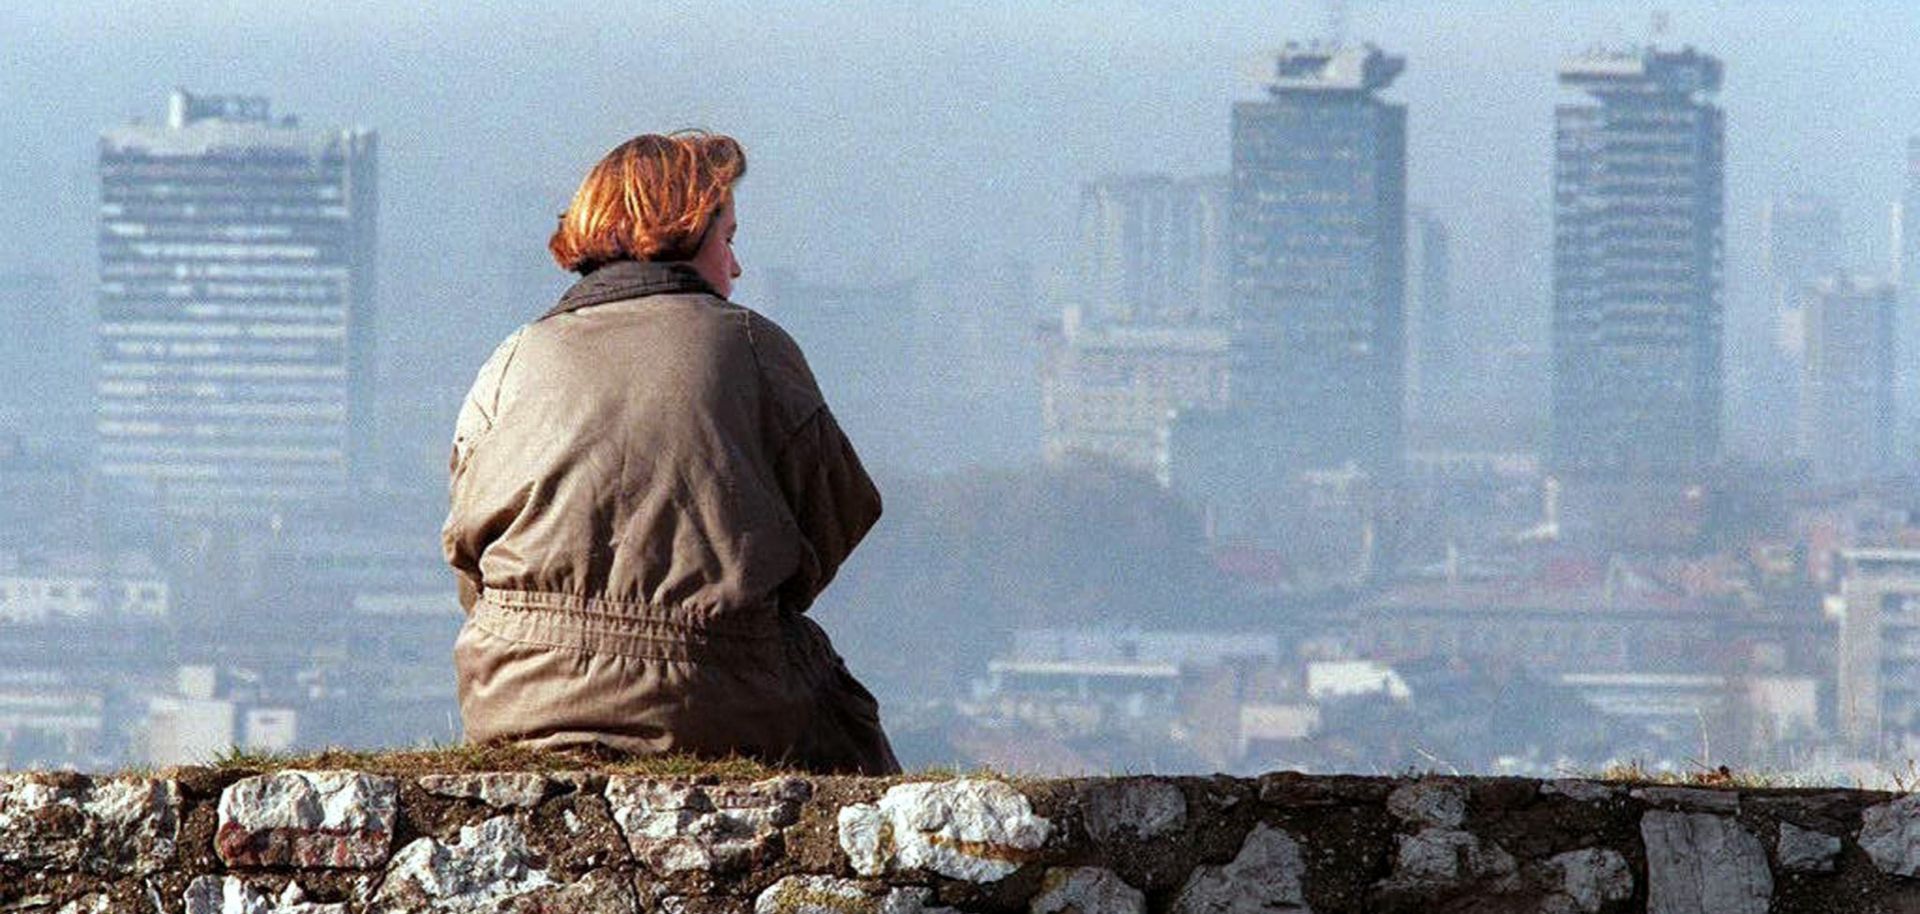 A Bosnia woman takes in the Sarajevo skyline from a location shielded from snipers, Nov. 17, 1995.